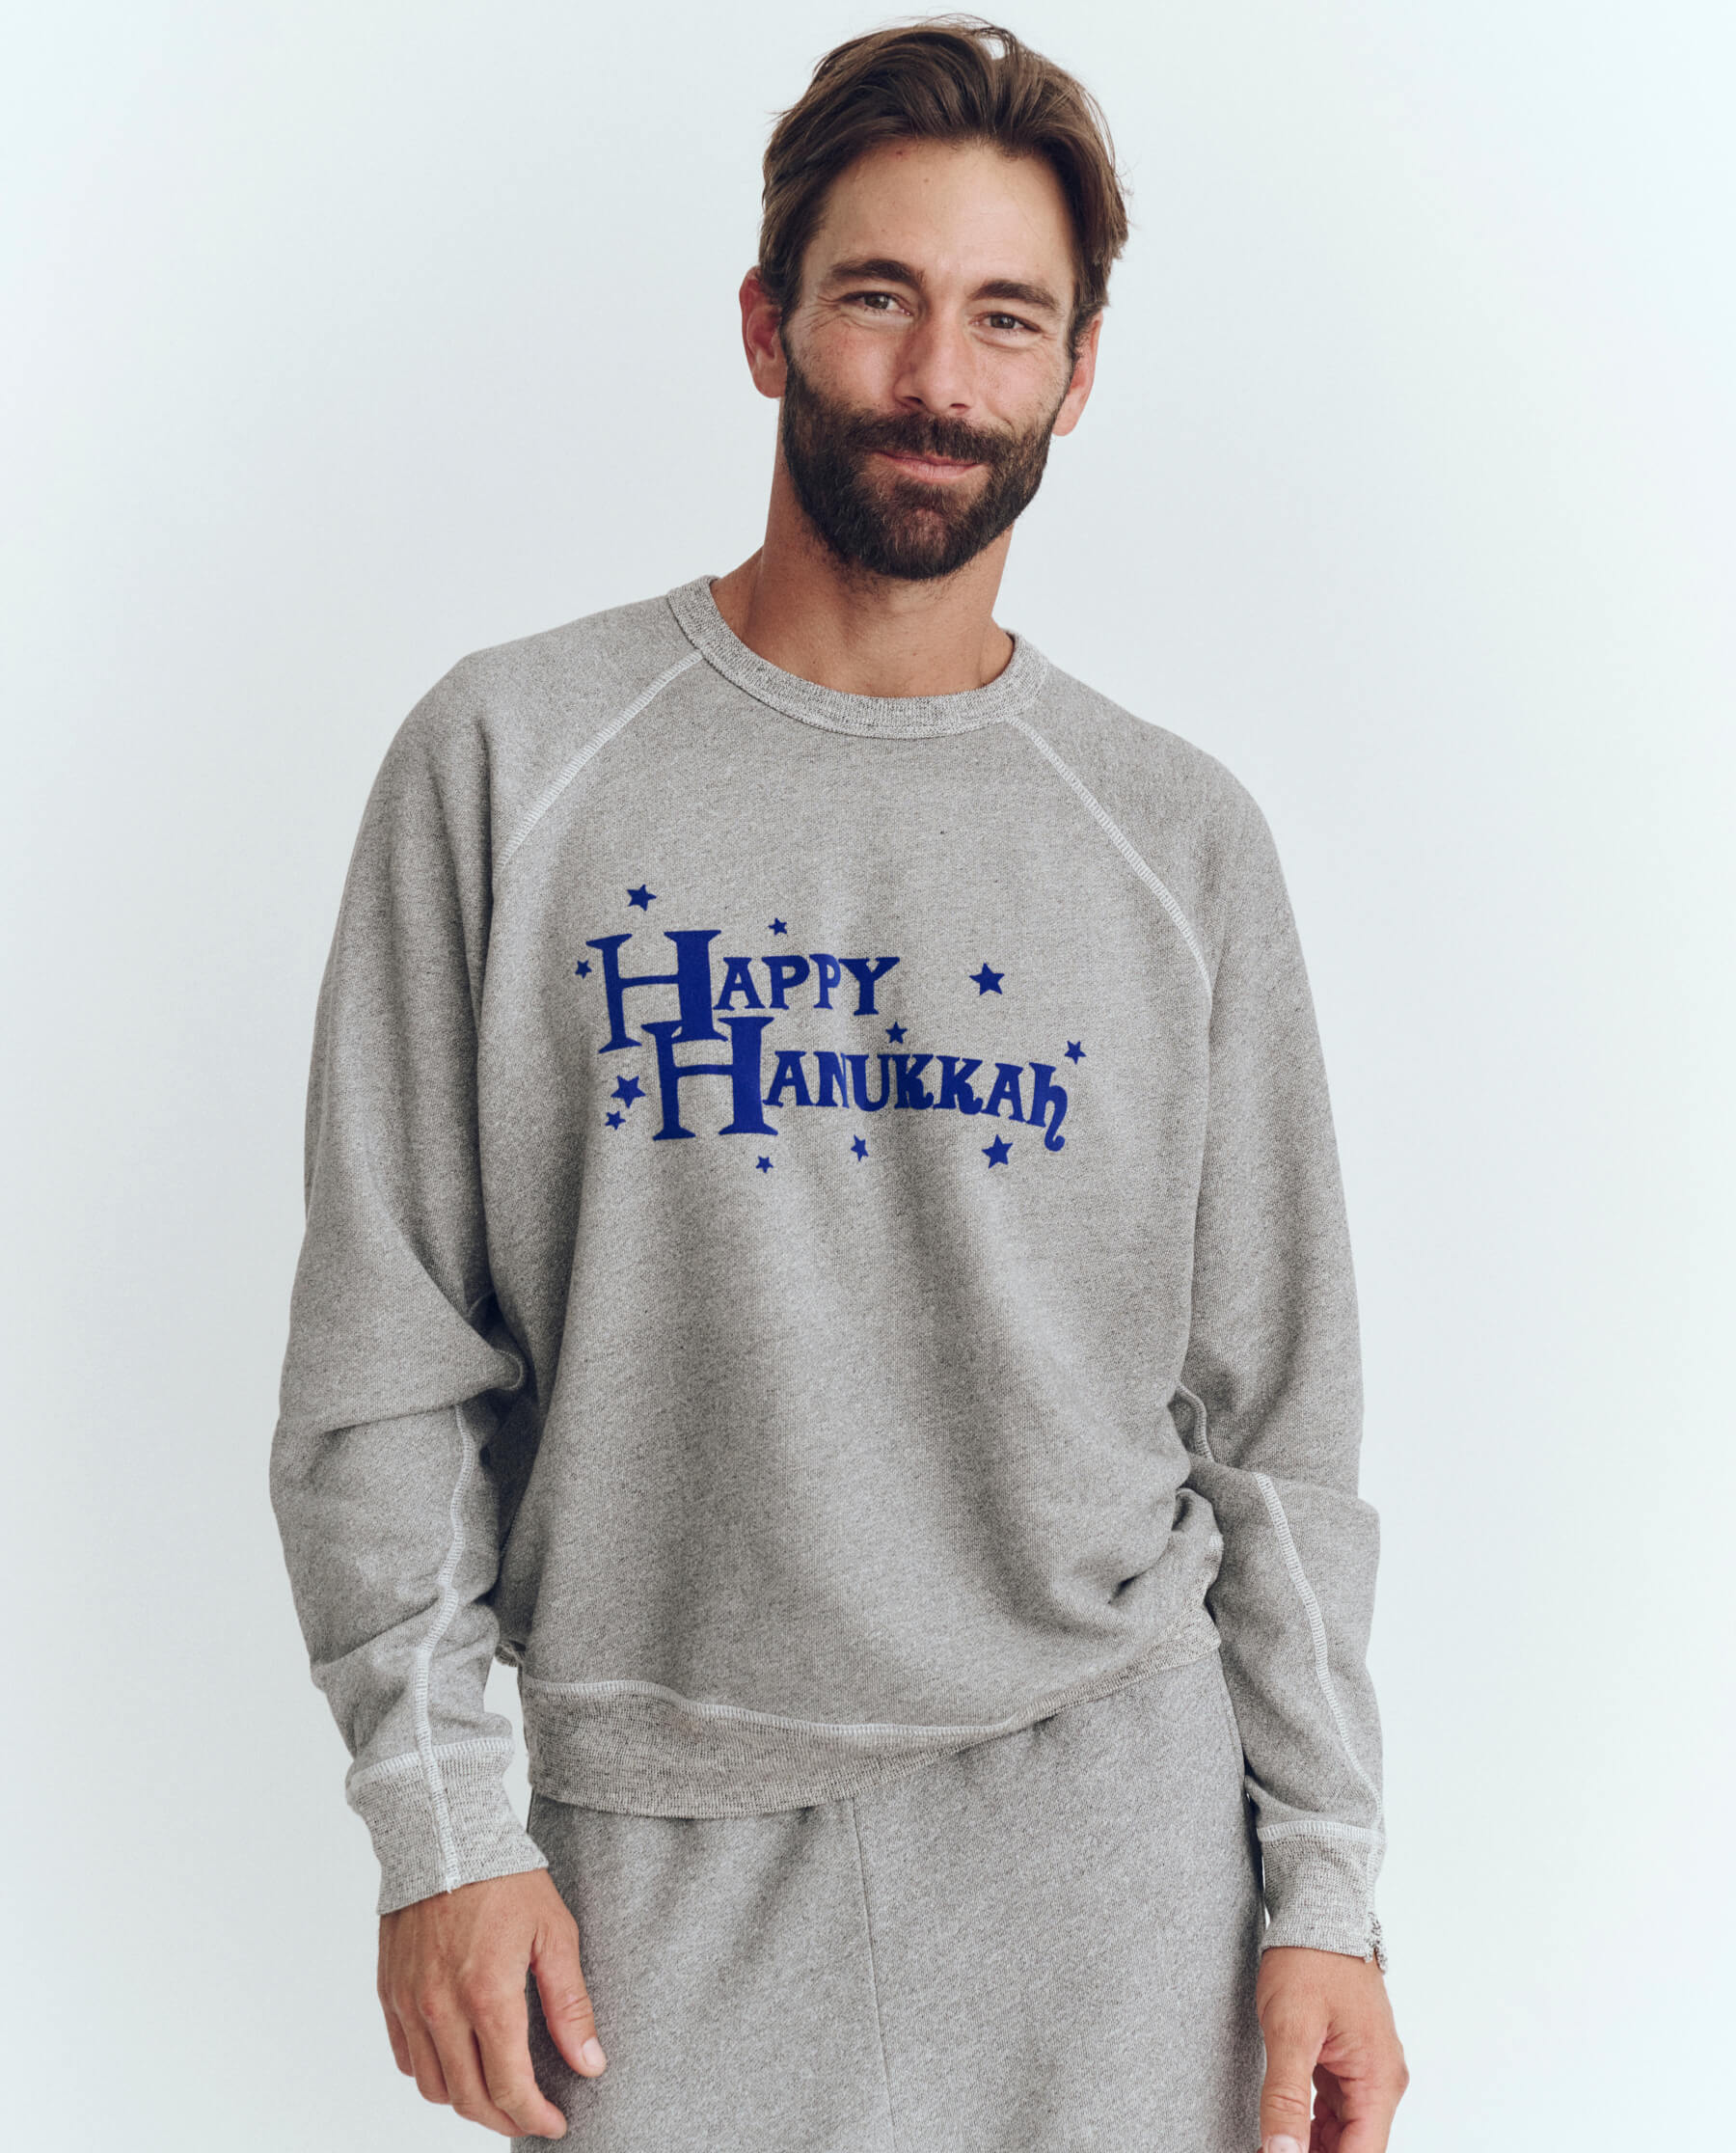 The Men's College Sweatshirt. Graphic -- Varsity Grey with Hannukah Graphic